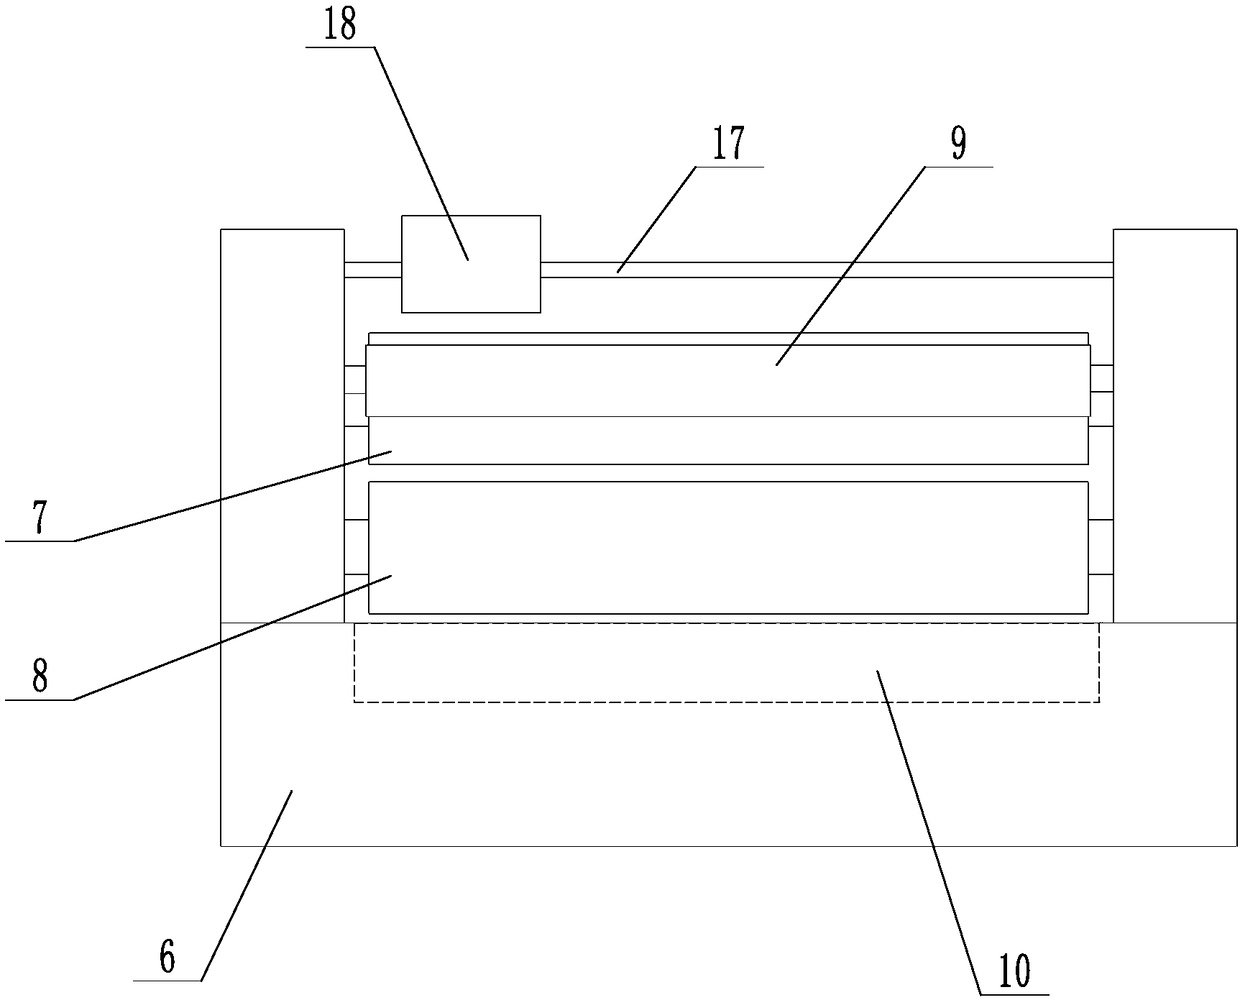 Plank paper-pasting equipment with automatic feed system